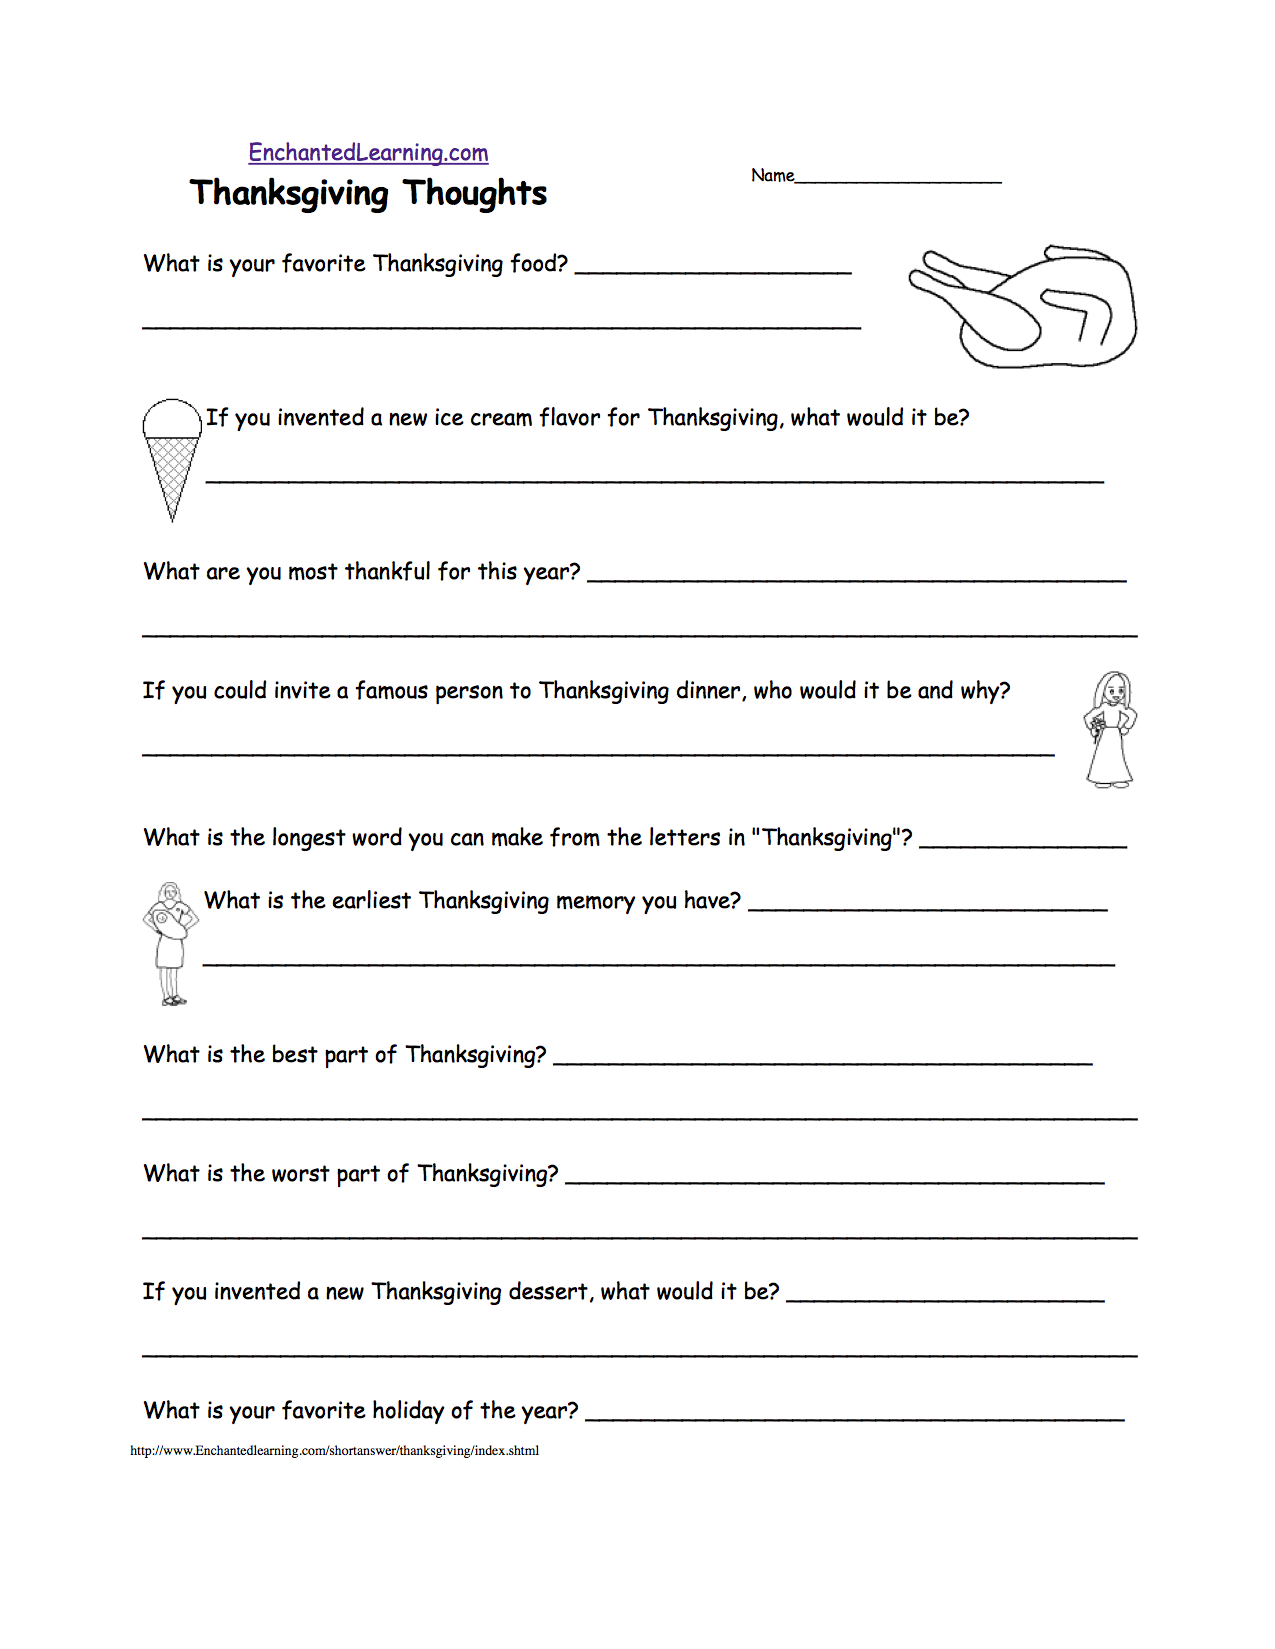 geography-worksheet-new-734-geography-worksheets-middle-school-pdf